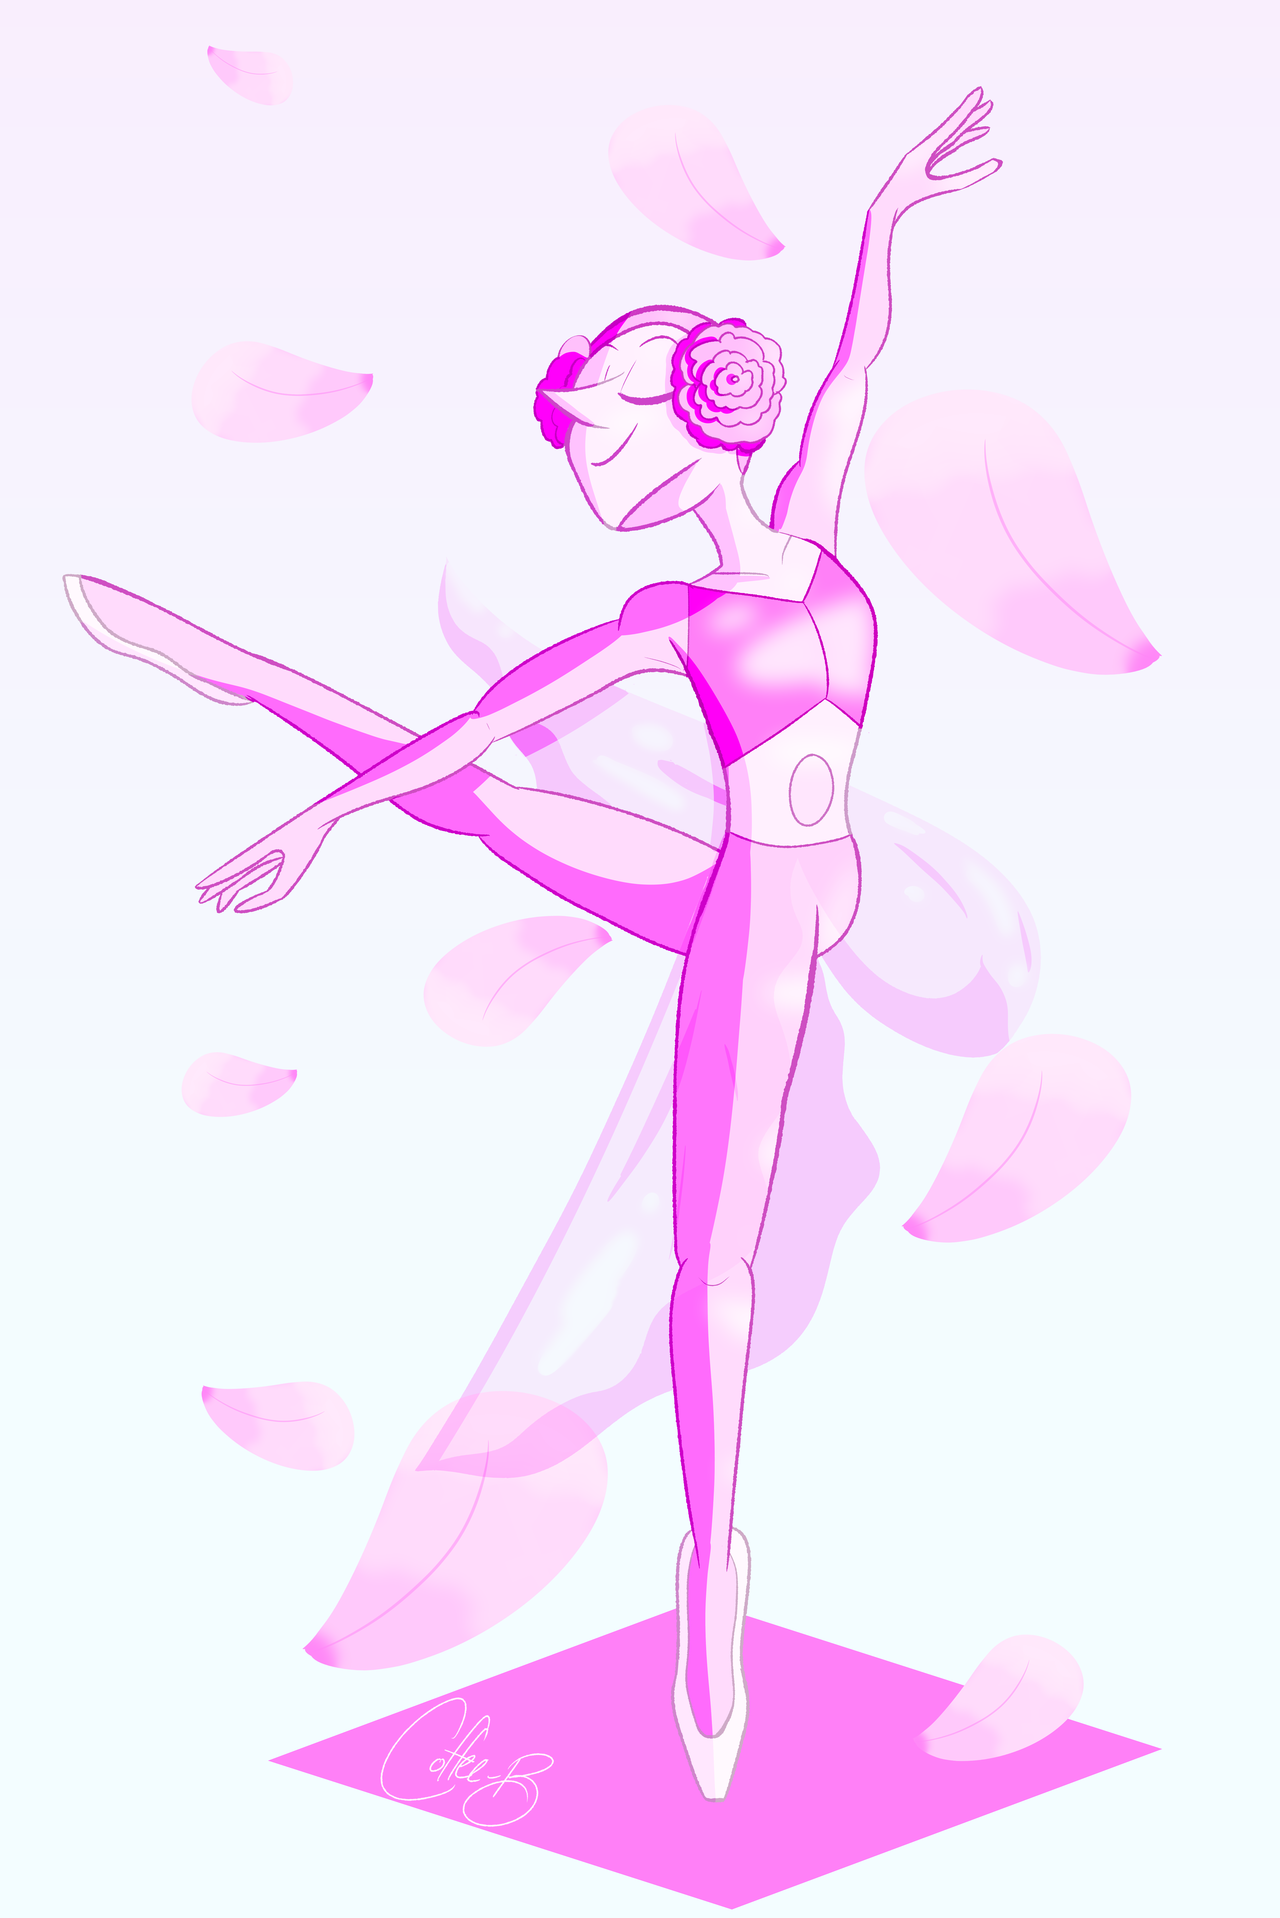 i REALLY like the theory that white pearl used to be pink